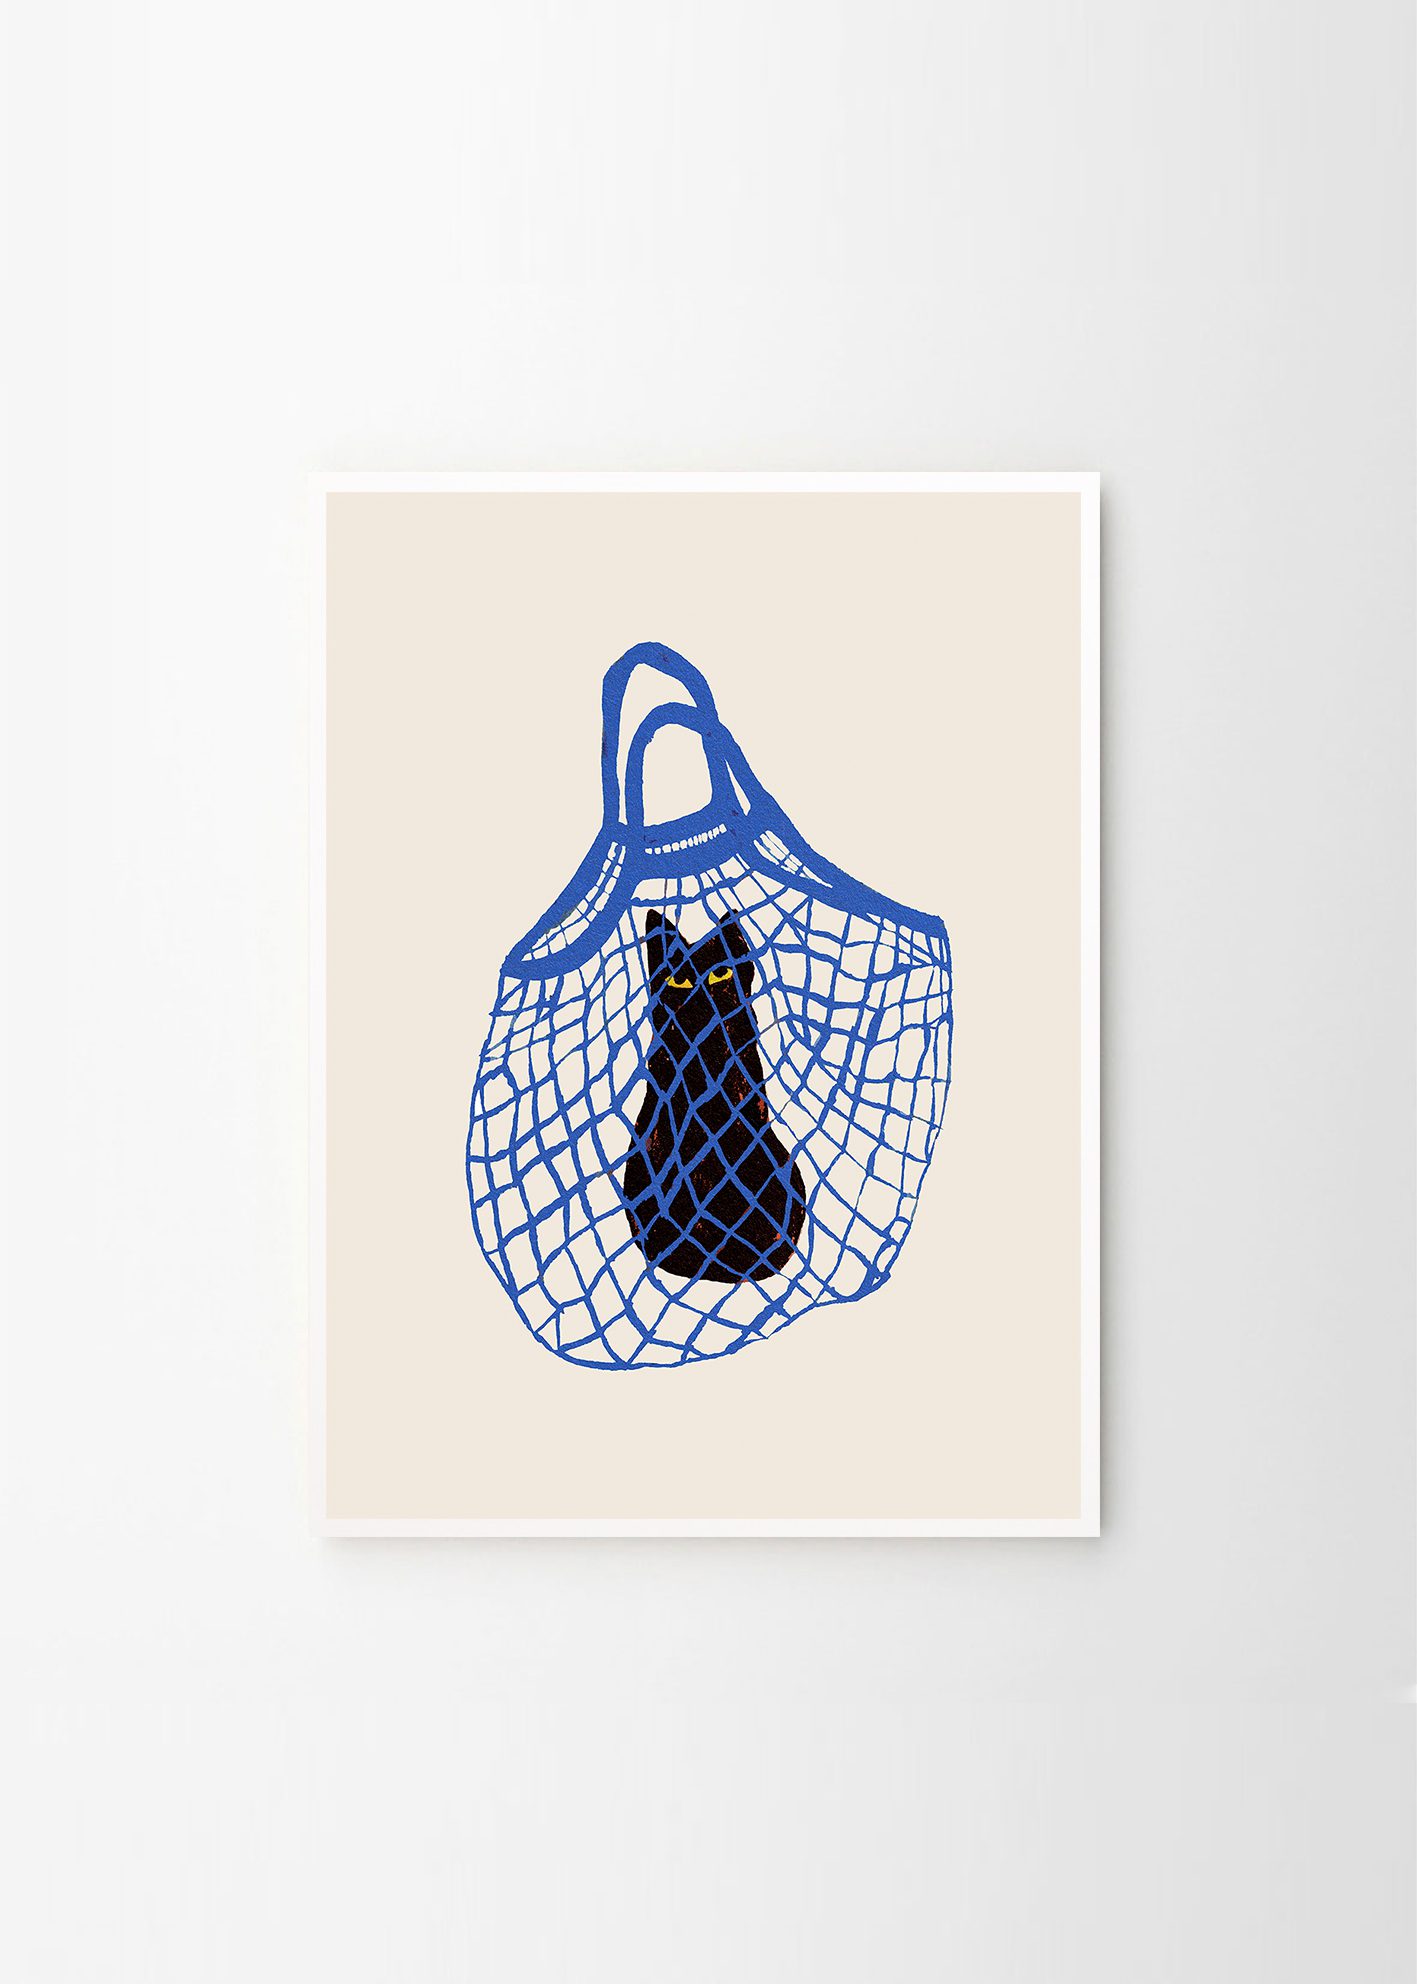 The Poster Club Chloe Purpero Johnson The Cats in the Bag